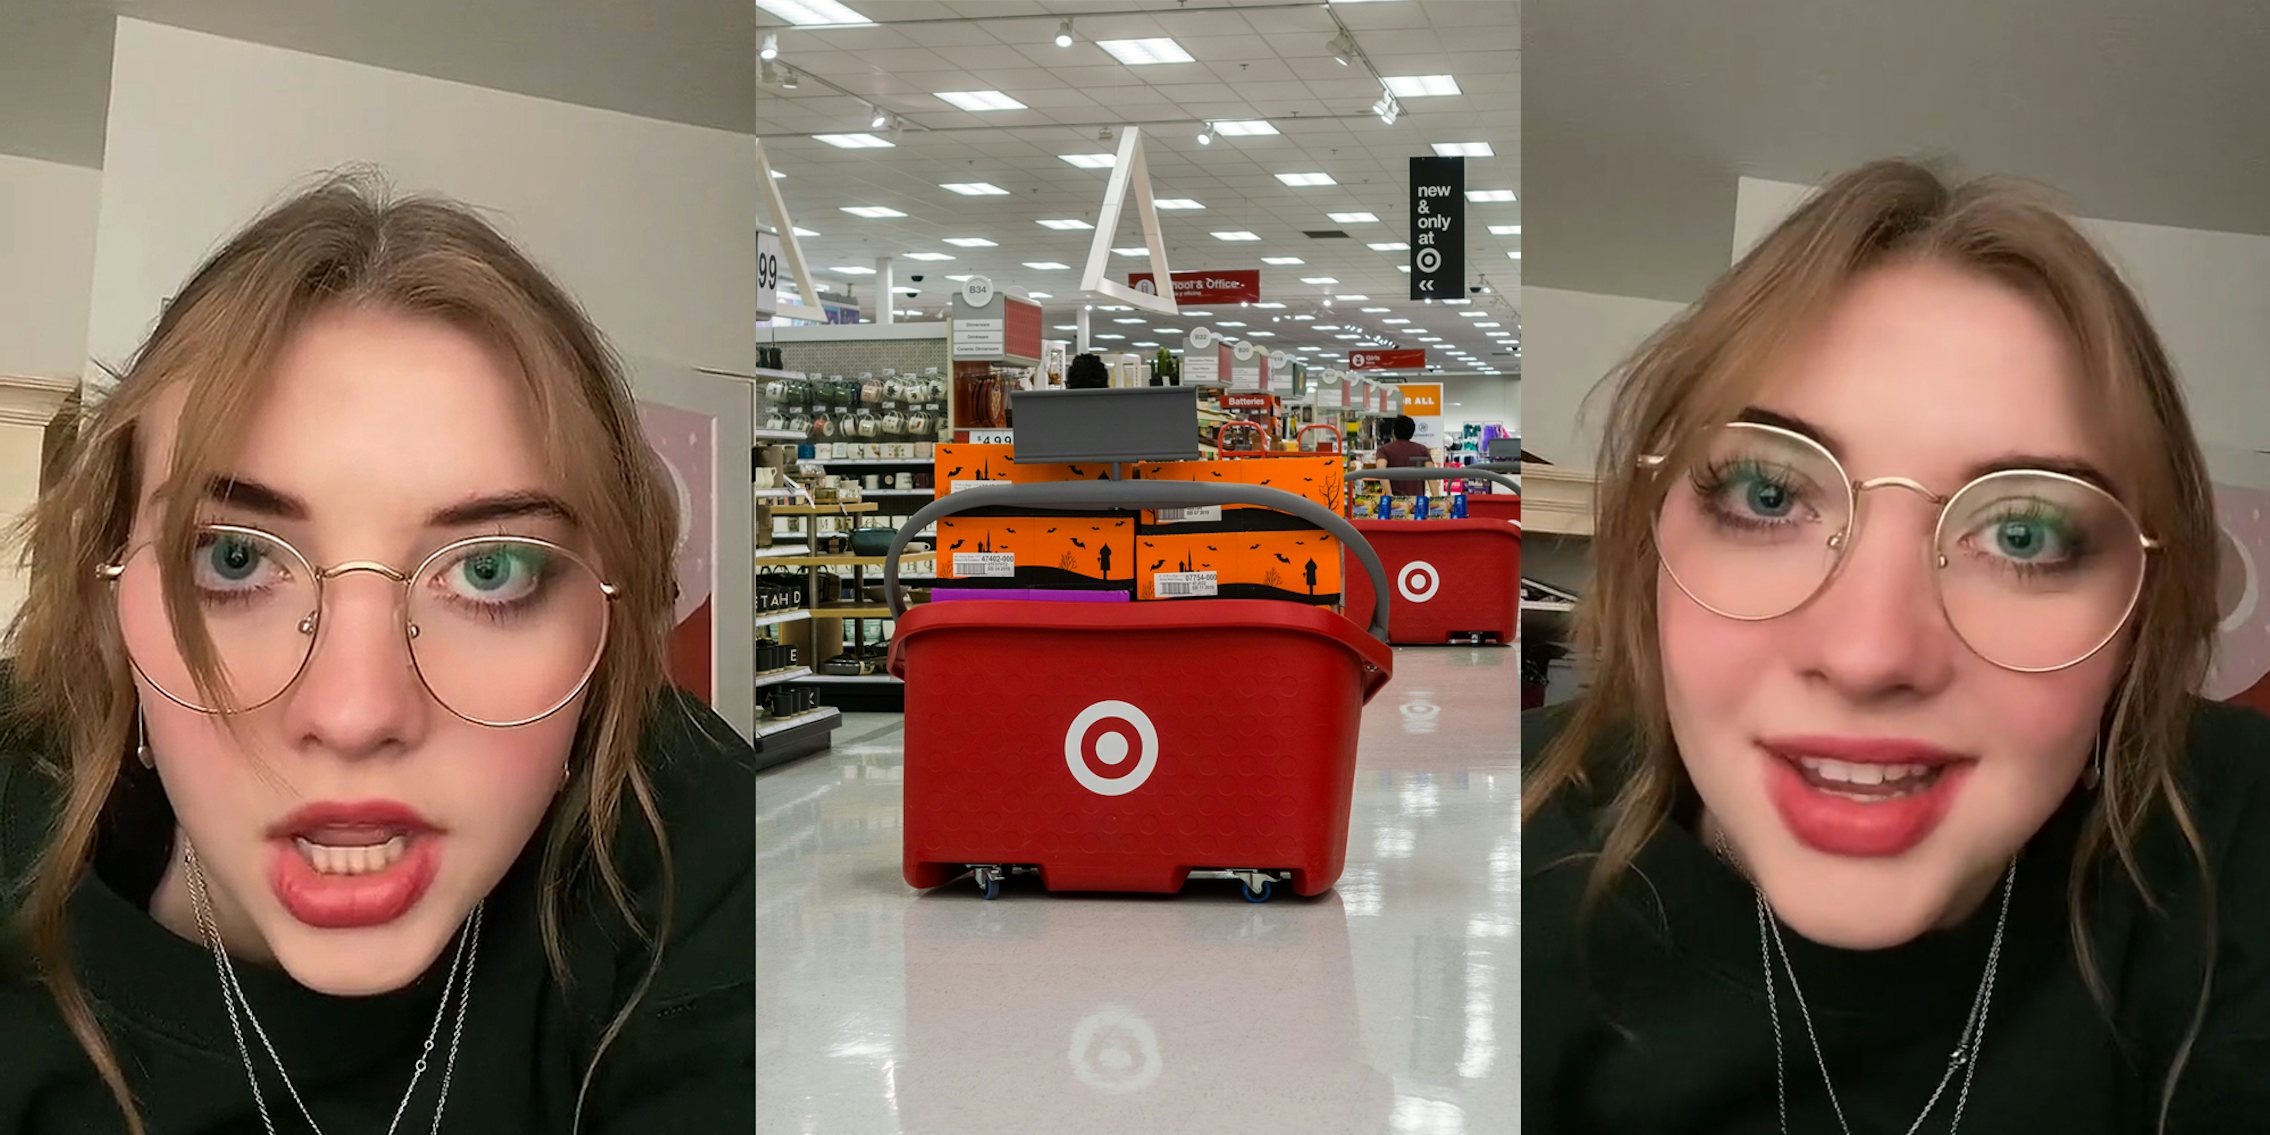 woman speaking in front of white walls (l) Target store interior (c) woman speaking in front of white walls (r)